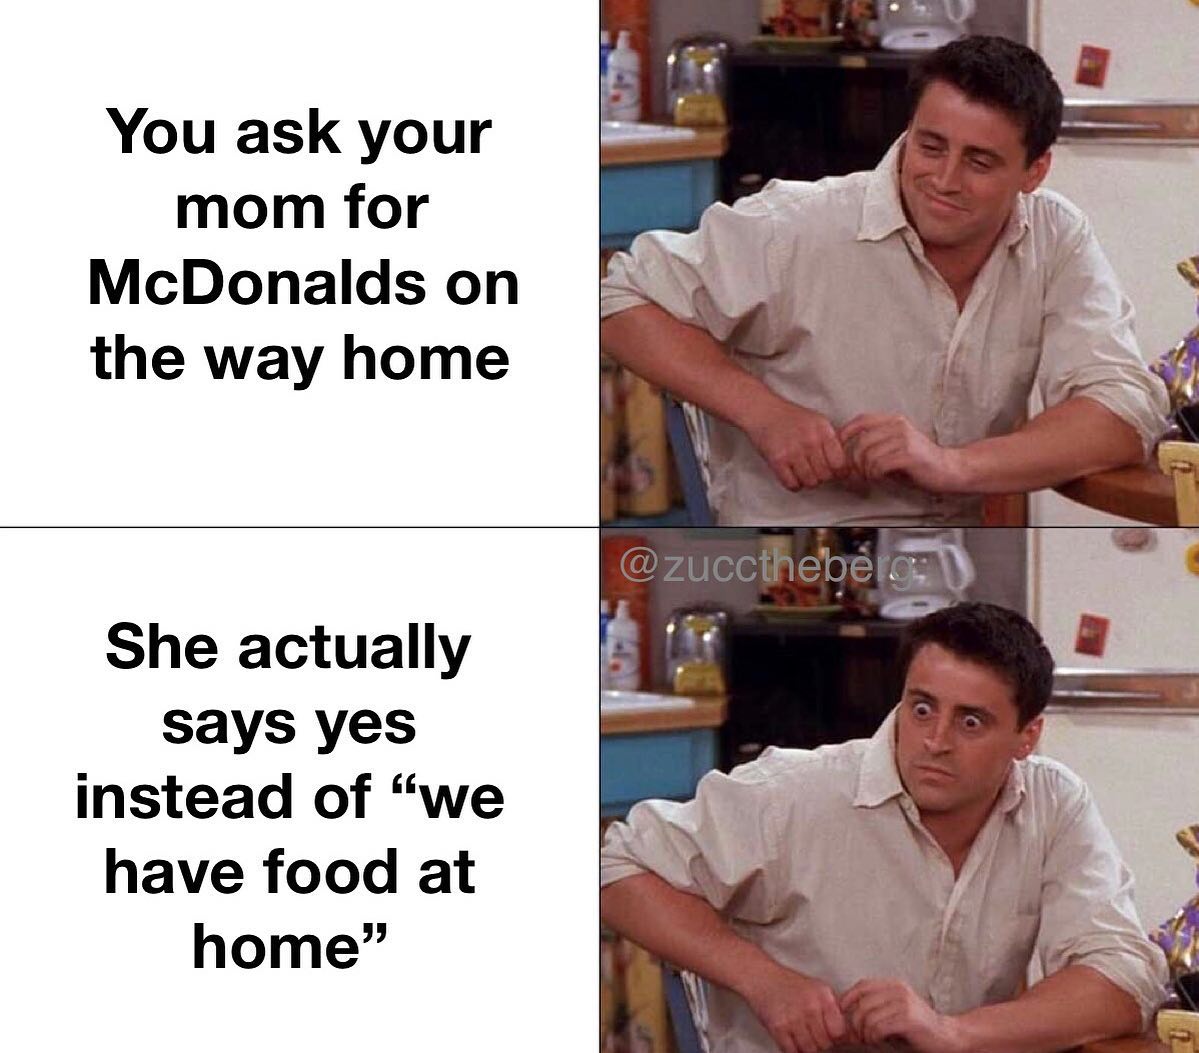 dank memes - funny covid 19 memes - You ask your mom for McDonalds on the way home She actually says yes instead of